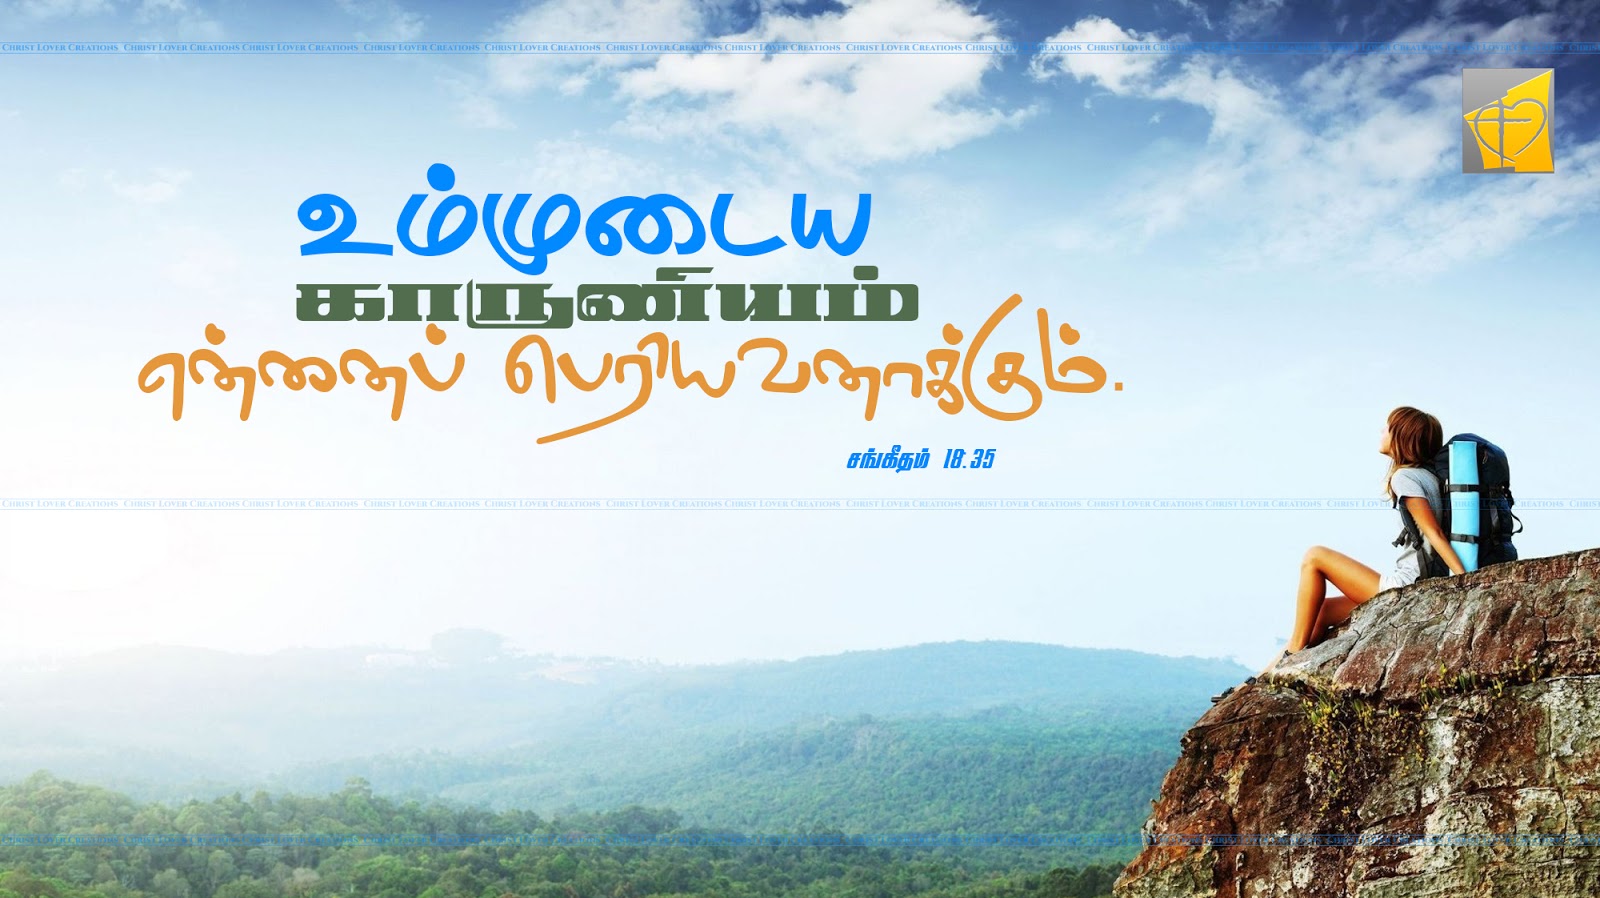 tamil bible verses search